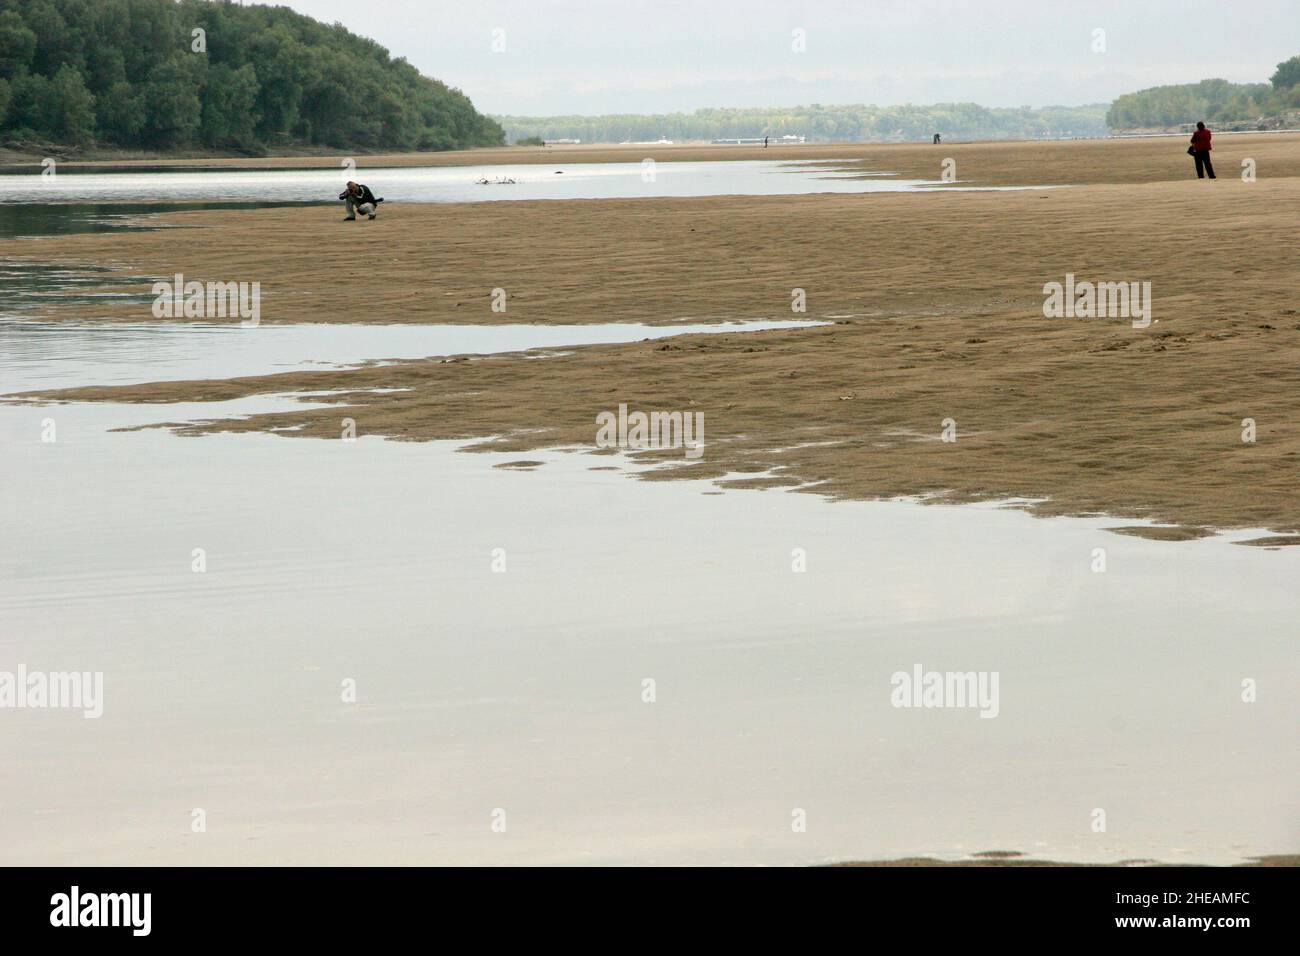 The Danube River has dried up, a river arm from the city of Ruse. The bottom of the Danube River Stock Photo